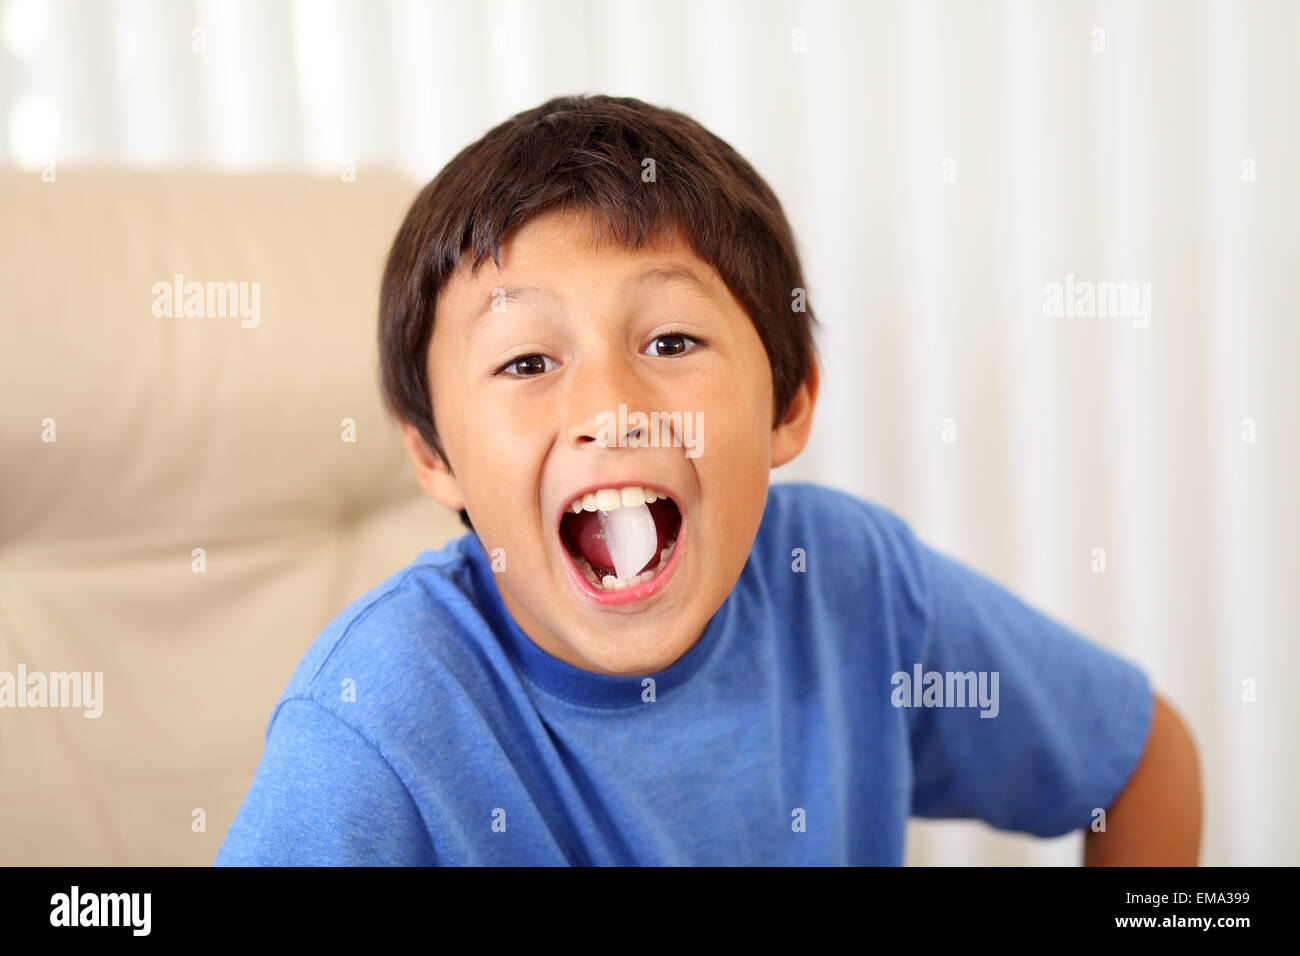 Young boy eating ice cube Stock Photo - Alamy